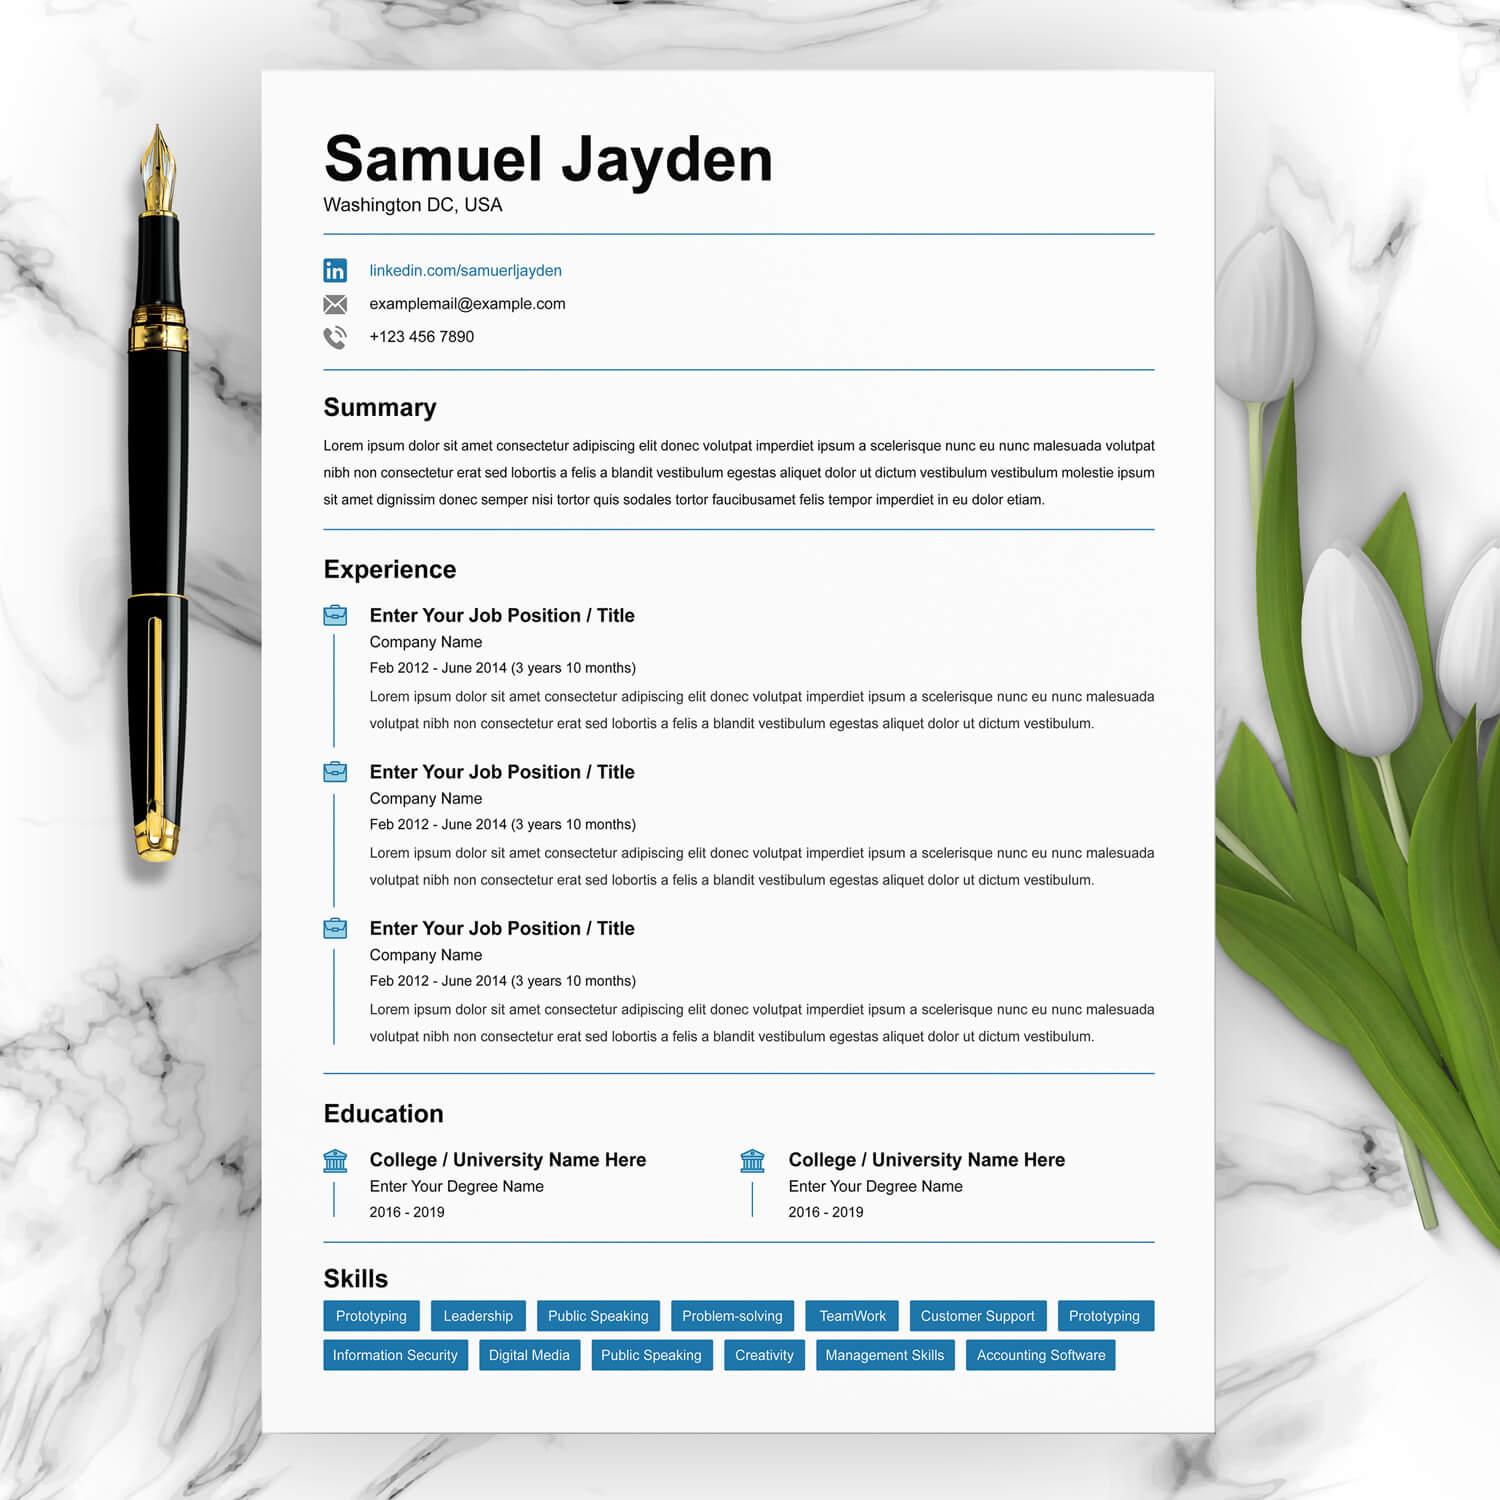 Super Easy Simple Ways The Pros Use To Promote resume